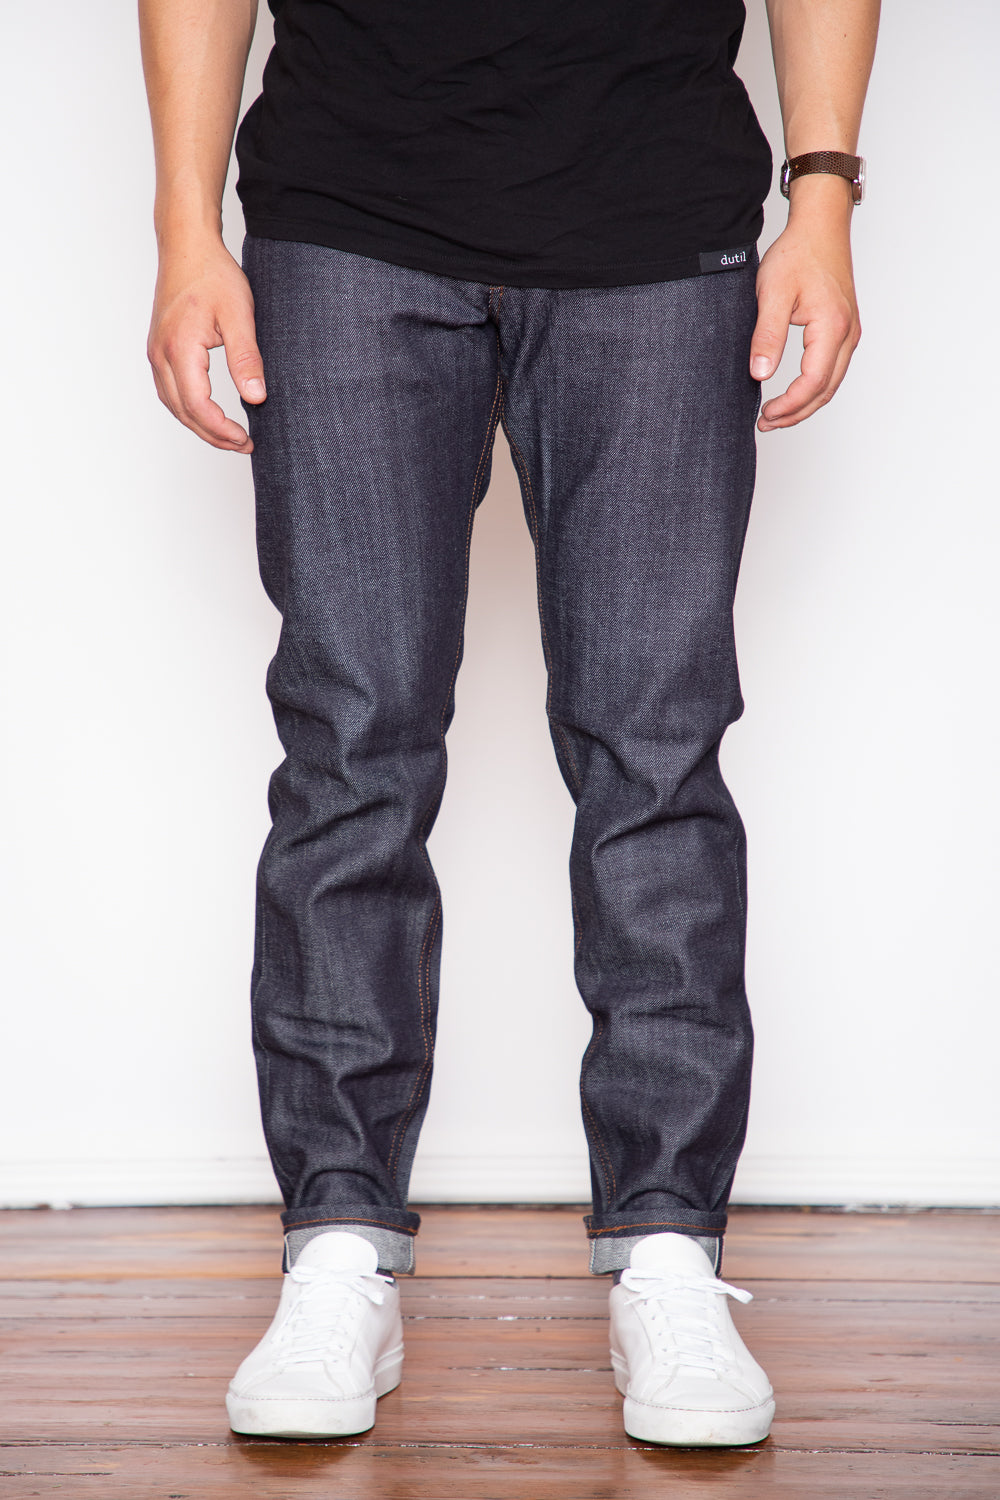 Naked and Famous Denim Easy Guy Stretch Selvedge-101033306